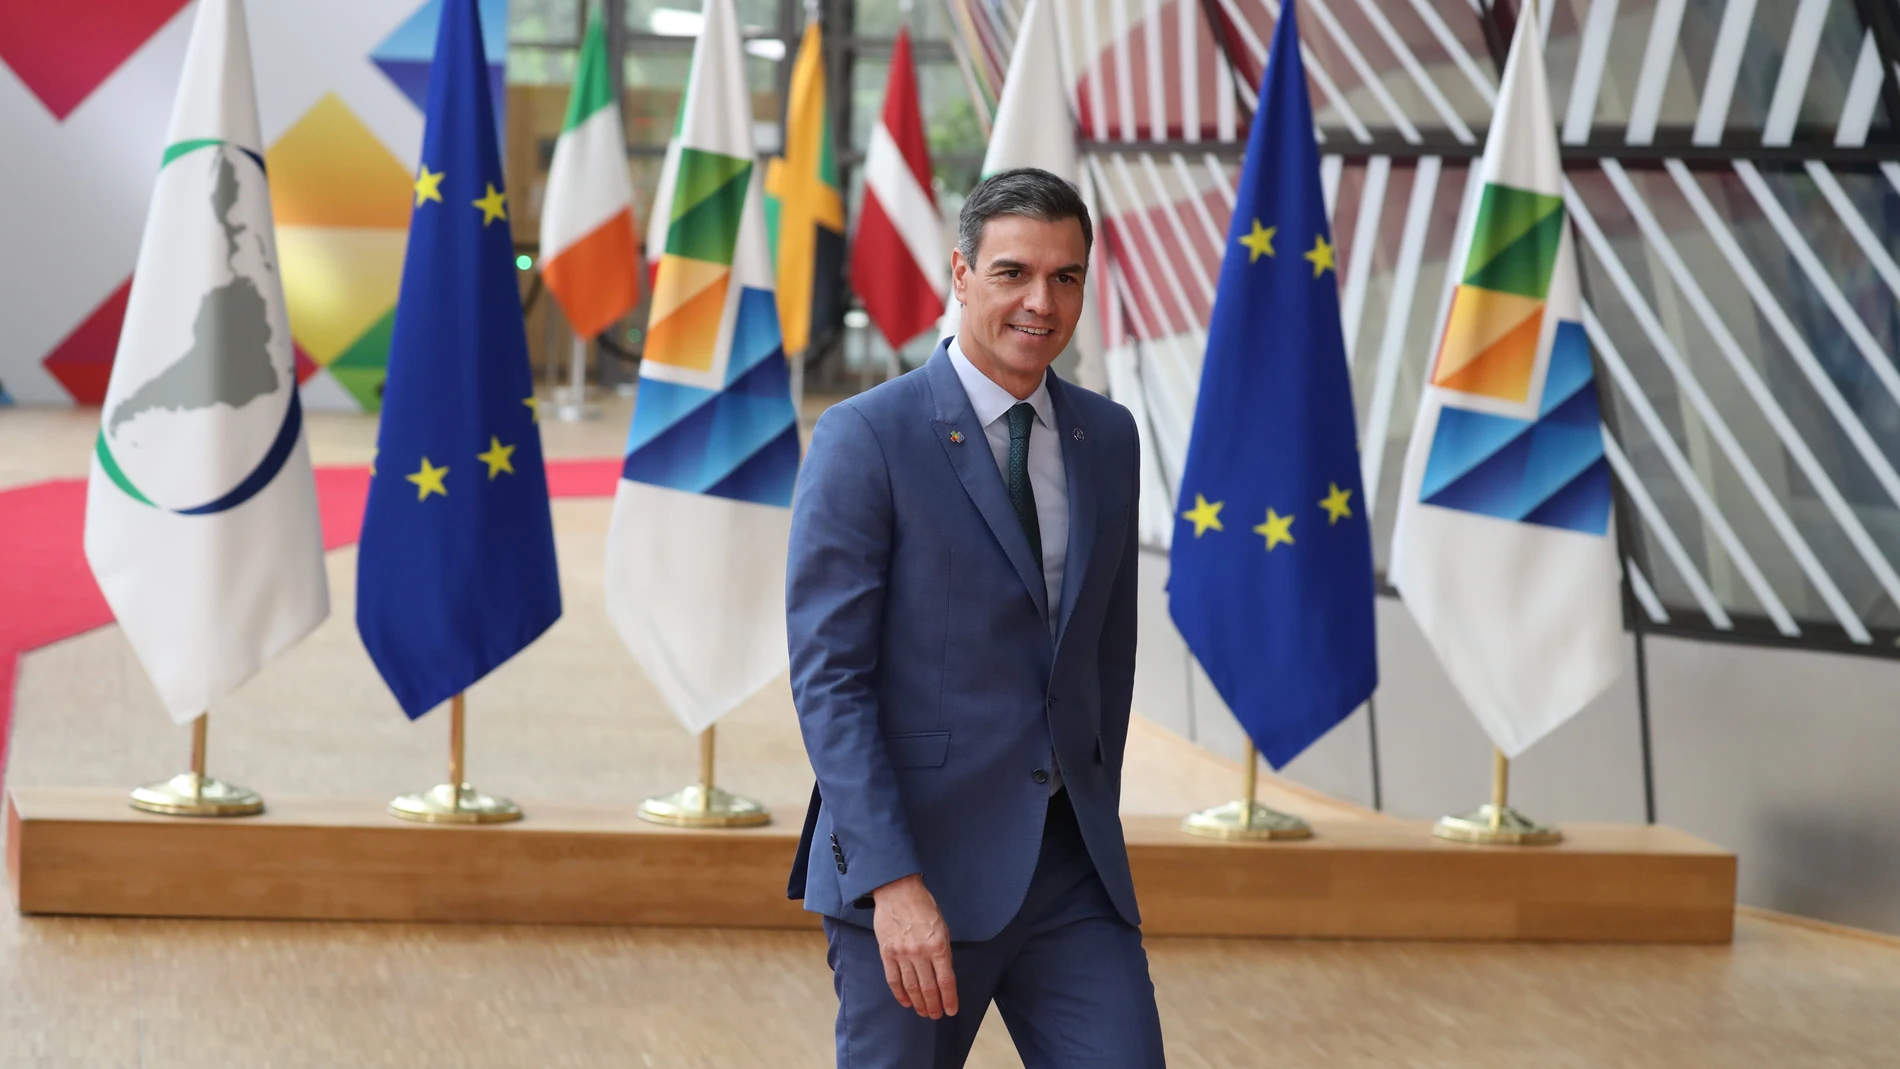 Prime Minister of Spain Pedro Sanchez arrives to talk to the press ahead of the EU - CELAC (Comunidad de Estados Latinoamericanos y Caribenos - Community of Latin American and Caribbean States) summit, in Brussels, Monday 17 July 2023. The EU-CELAC summits bring together European, Latin American and Caribbean heads of state and government to strengthen relations between these regions. Europa Press 17/07/2023